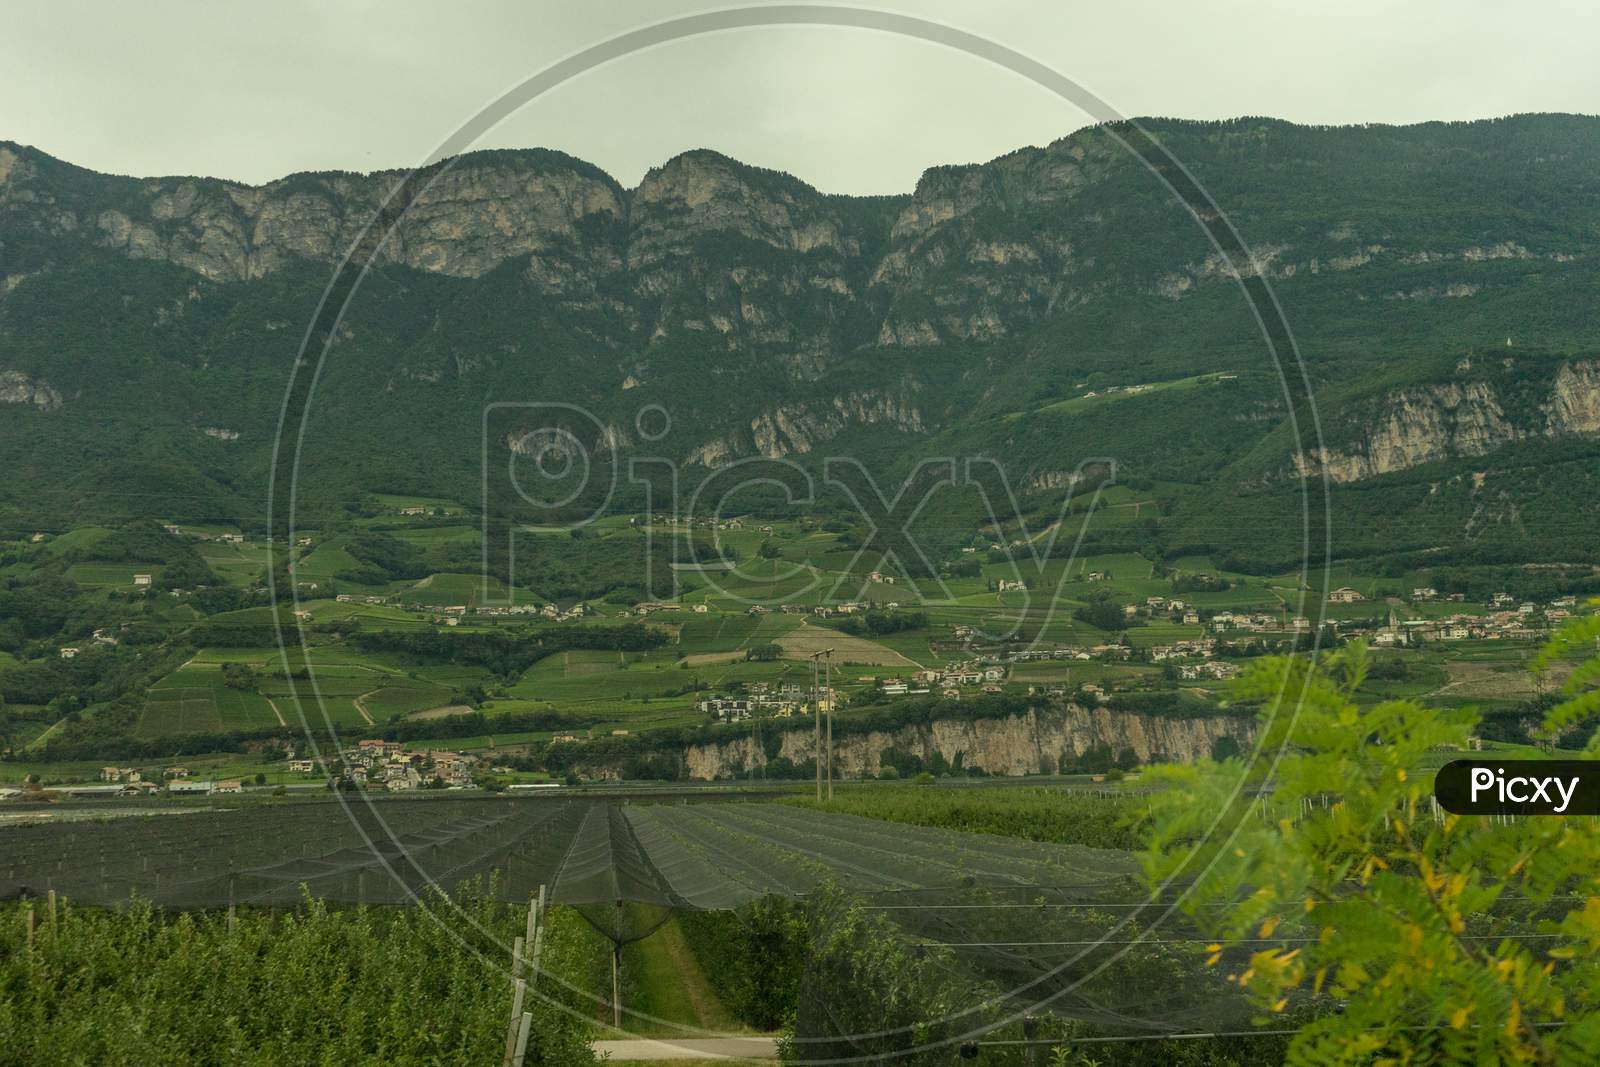 Italy,La Spezia To Kasltelruth Train, A Large Green Field With A Mountain In The Background